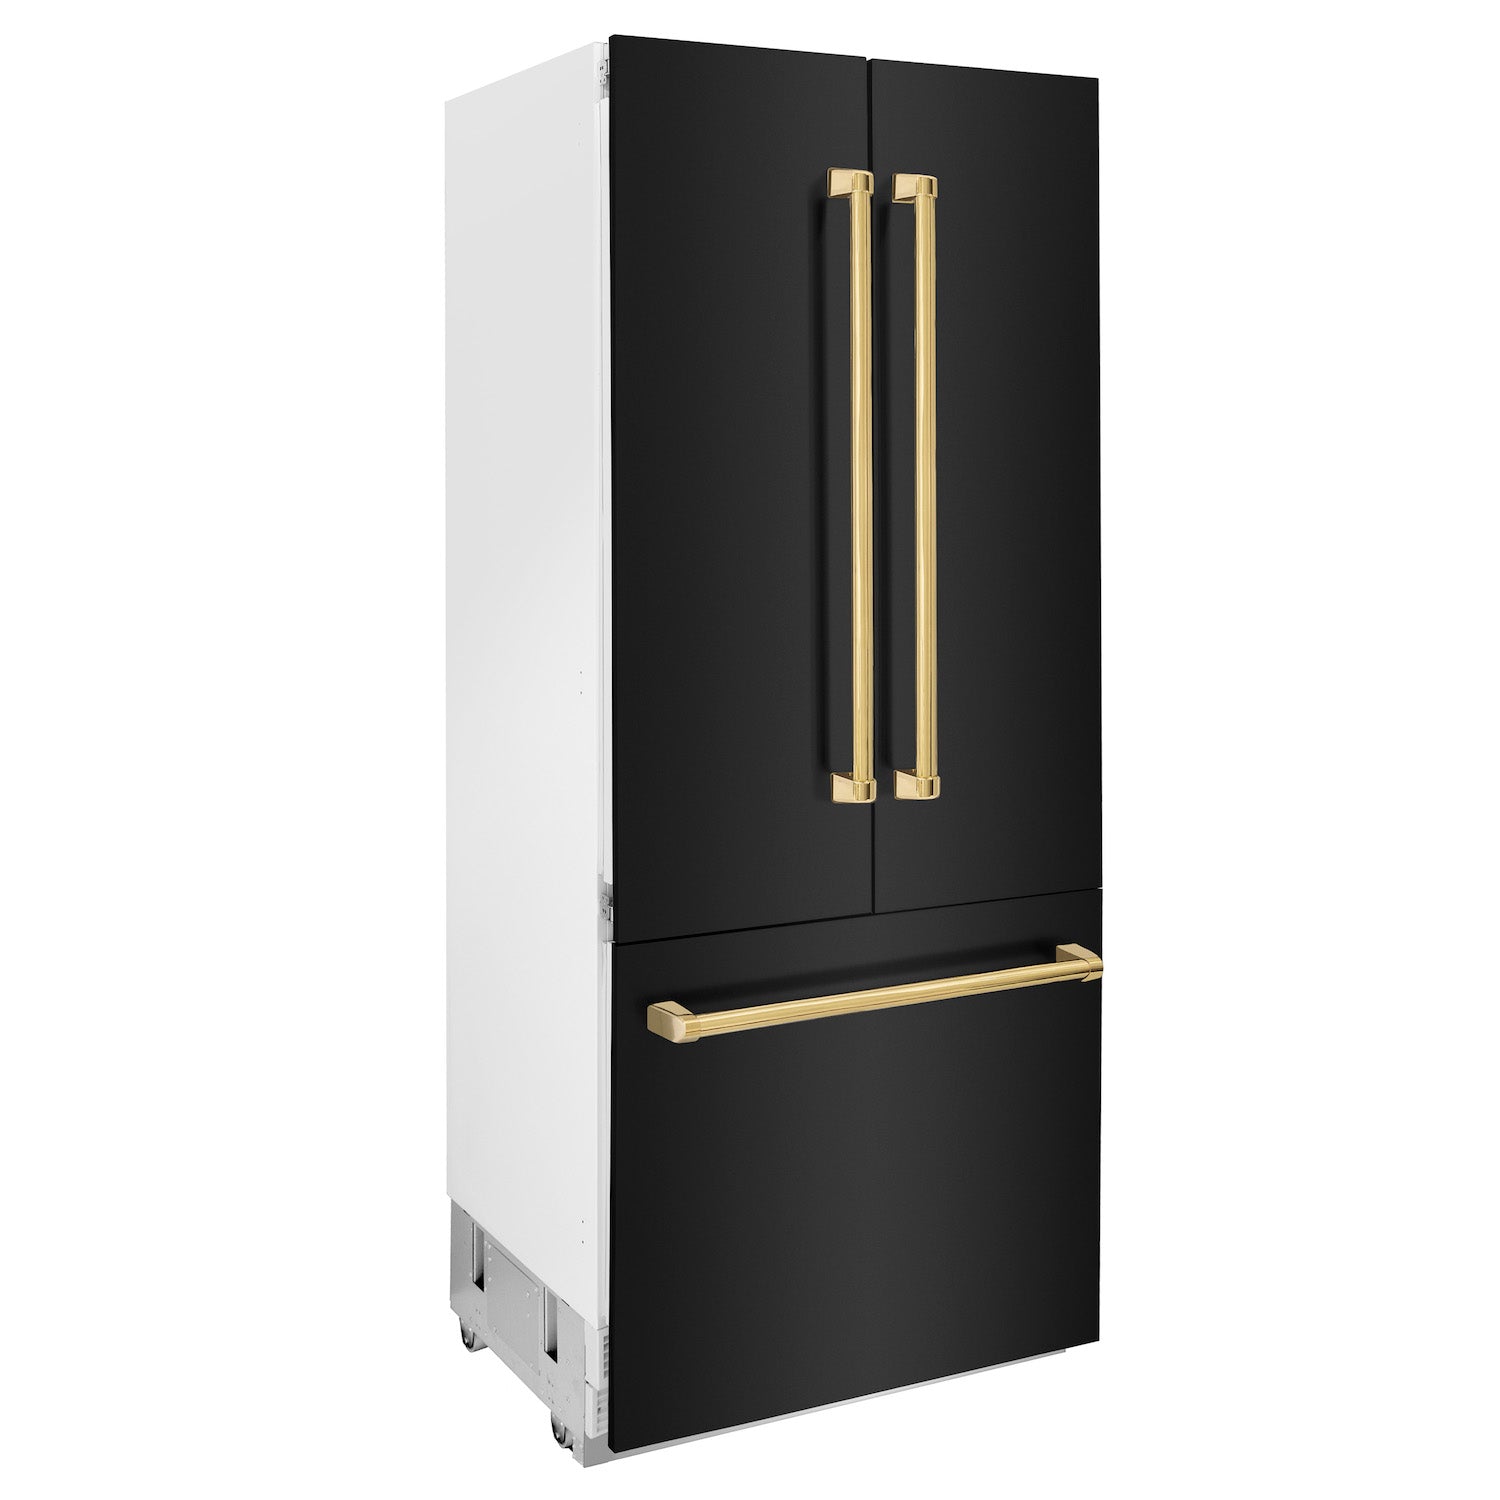 ZLINE 36" Autograph Edition 19.6 cu. ft. Built-in 3-DoorFrench Door Refrigerator with Internal Water and Ice Dispenser in Black Stainless Steel with Gold Accents (RBIVZ-BS-36-G)